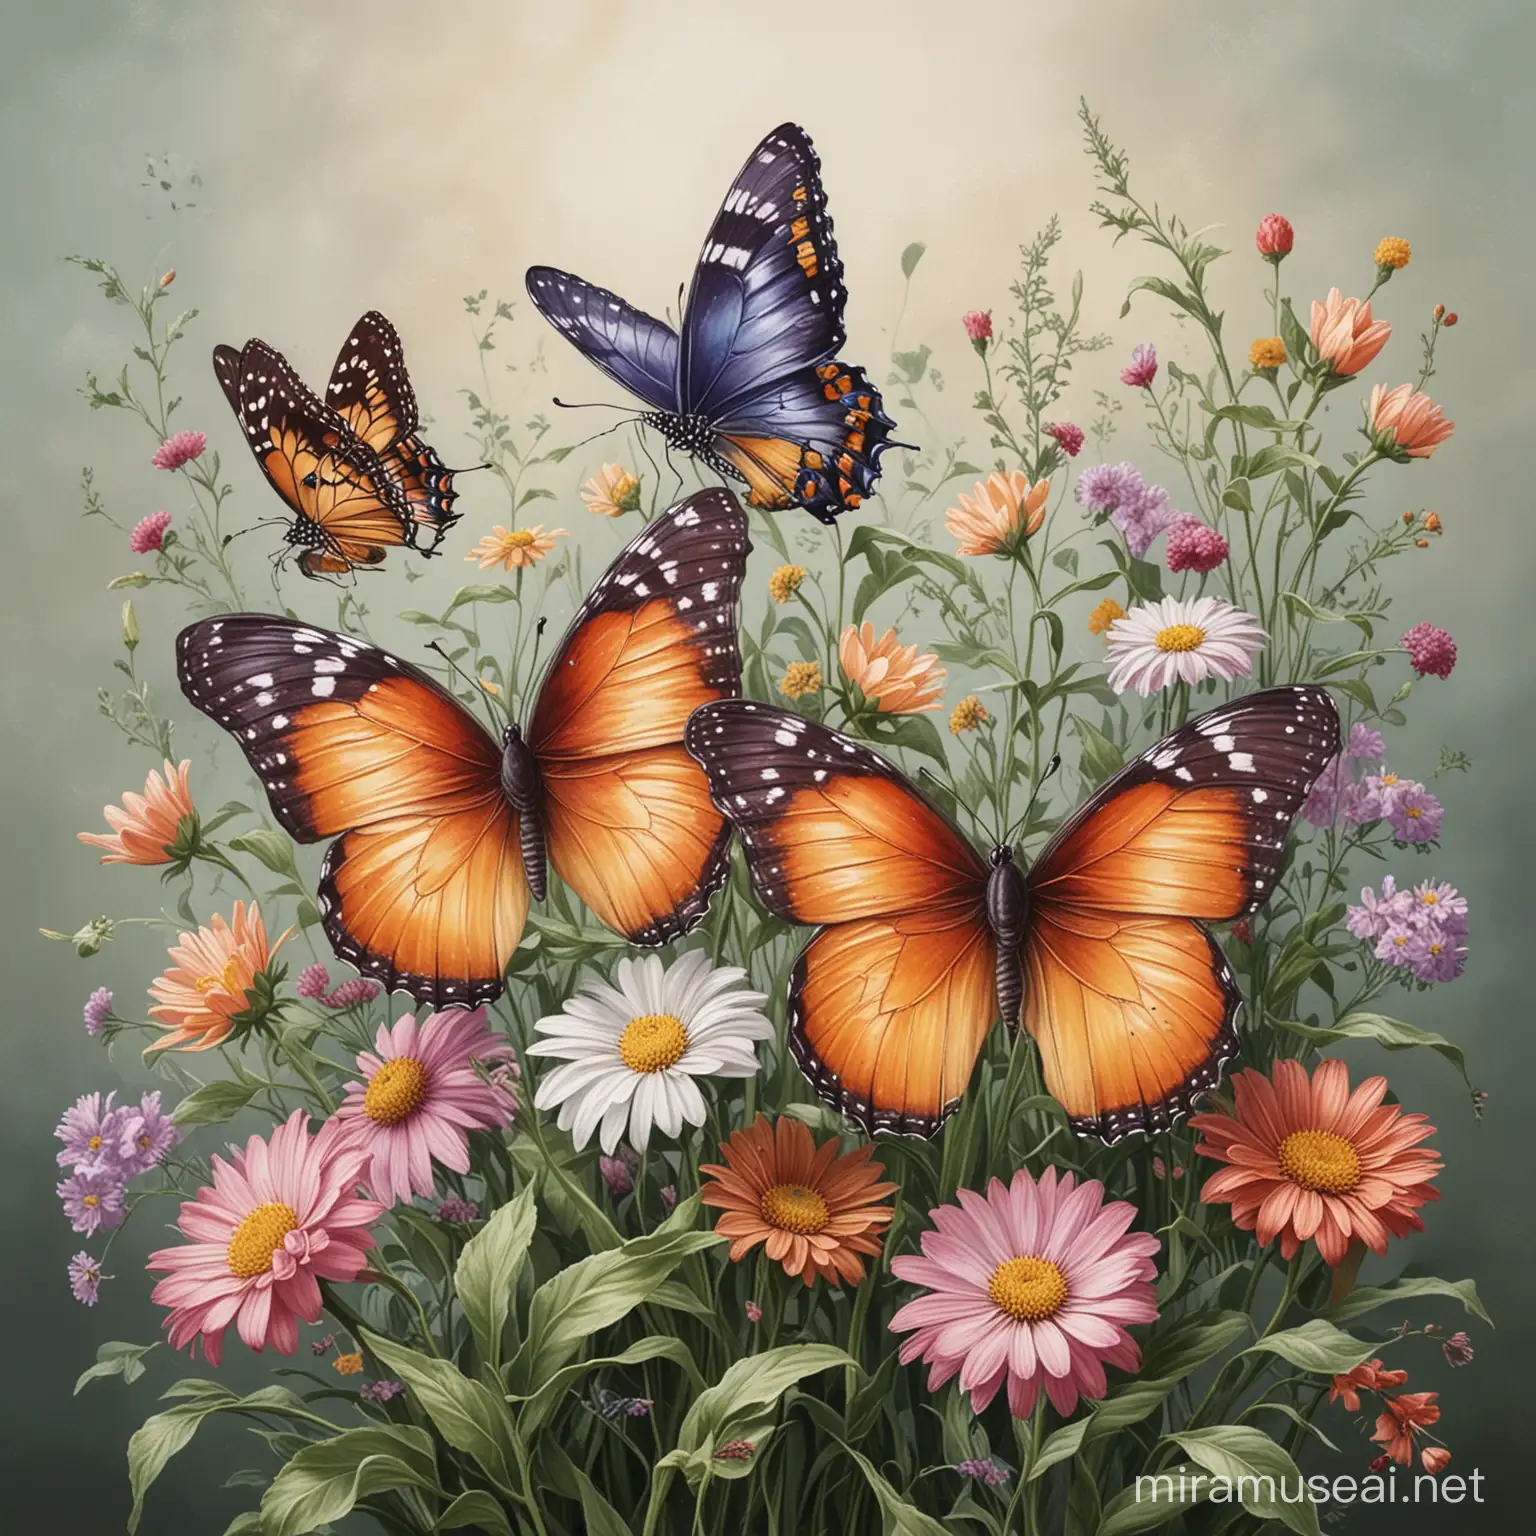 Colorful Flowers with Two Playful Butterflies